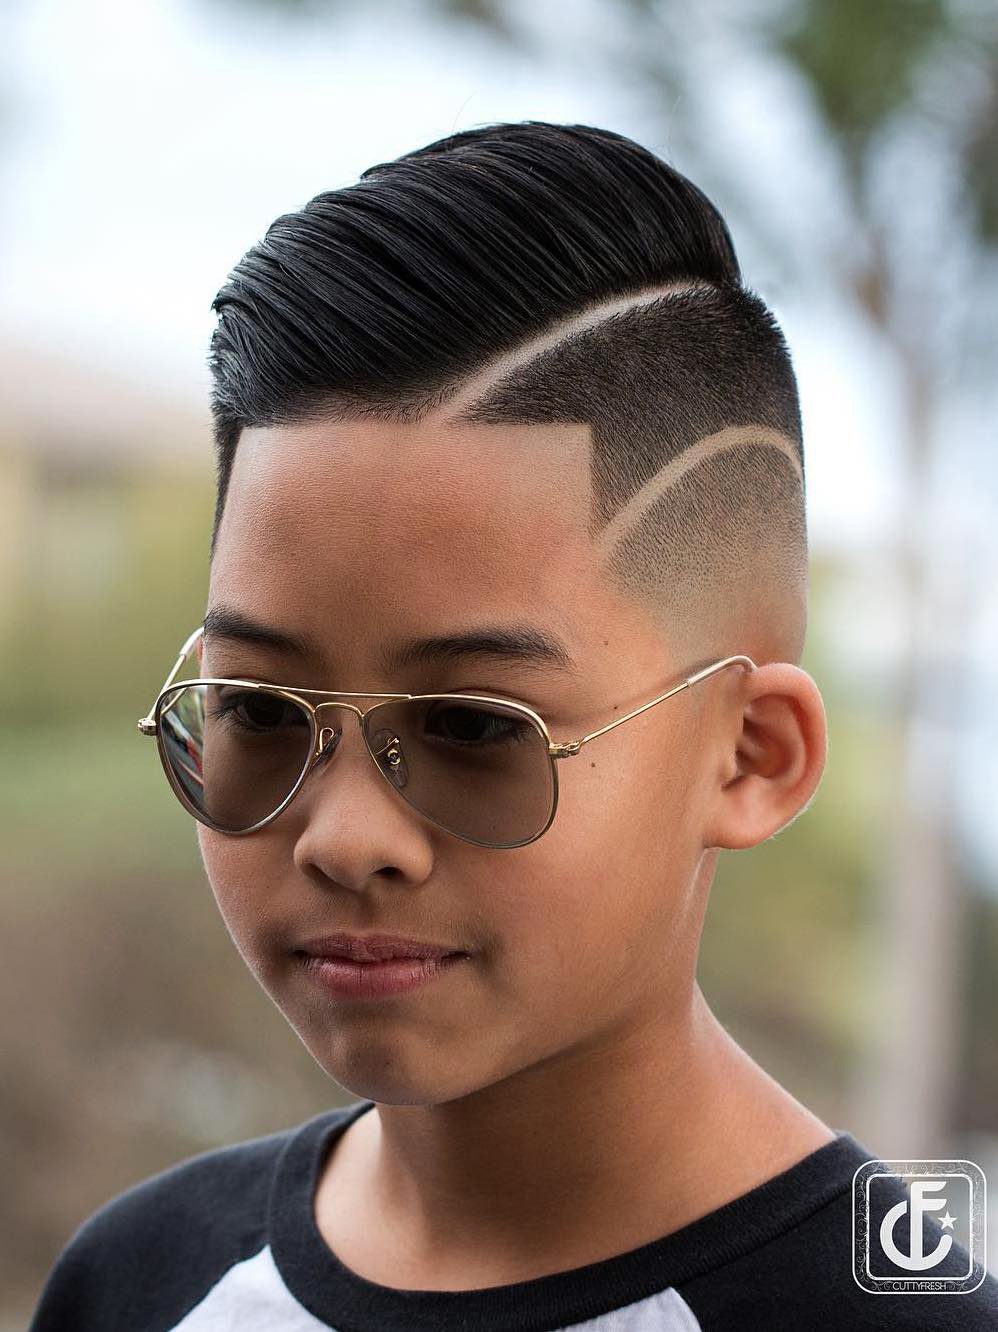 90 Cool Haircuts For Kids For 2021 With so many trendy boys haircuts to choose from, picking just one of these cool hairstyles to get can be a challenge. 90 cool haircuts for kids for 2021